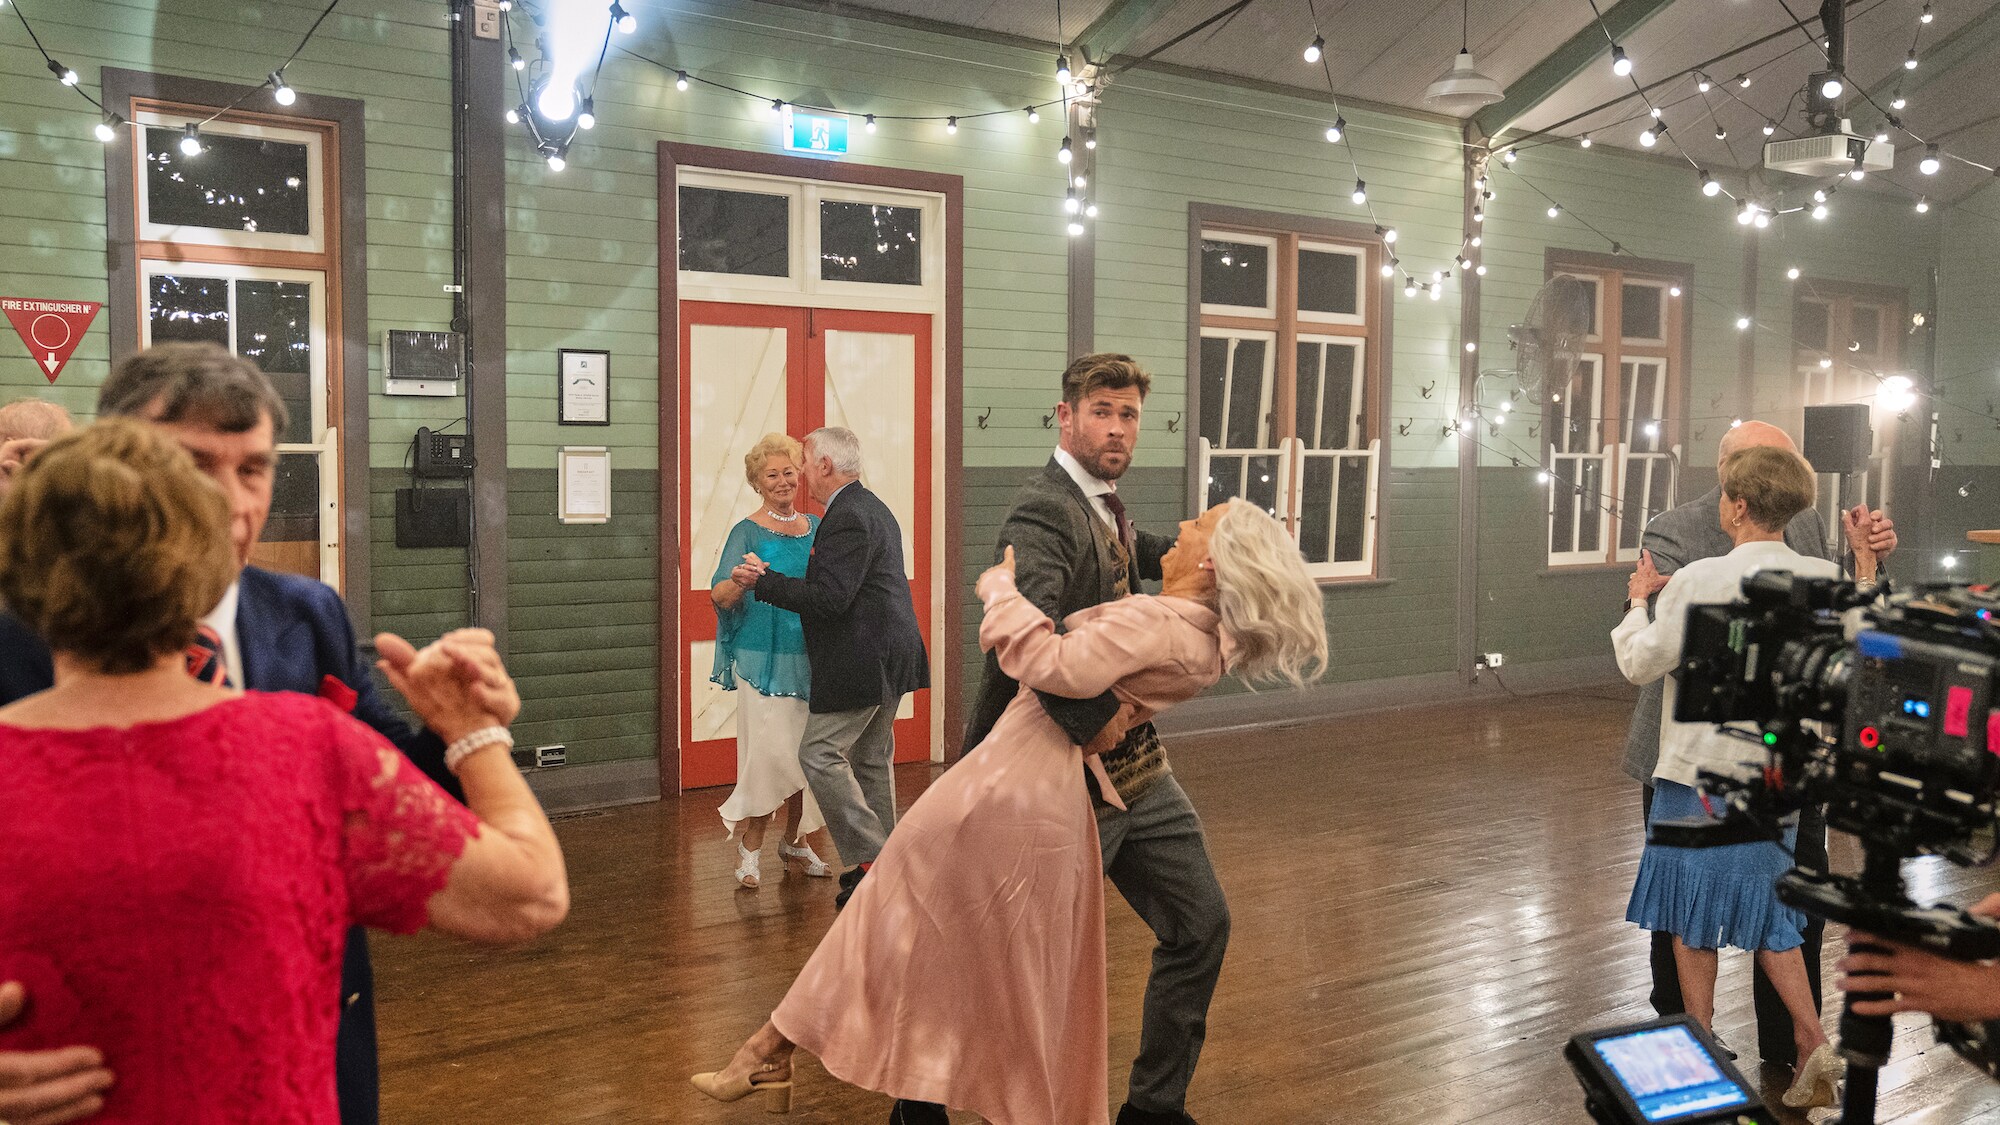 Chris Hemsworth and Elsa dance with other residents. (National Geographic for Disney+/Craig Parry)